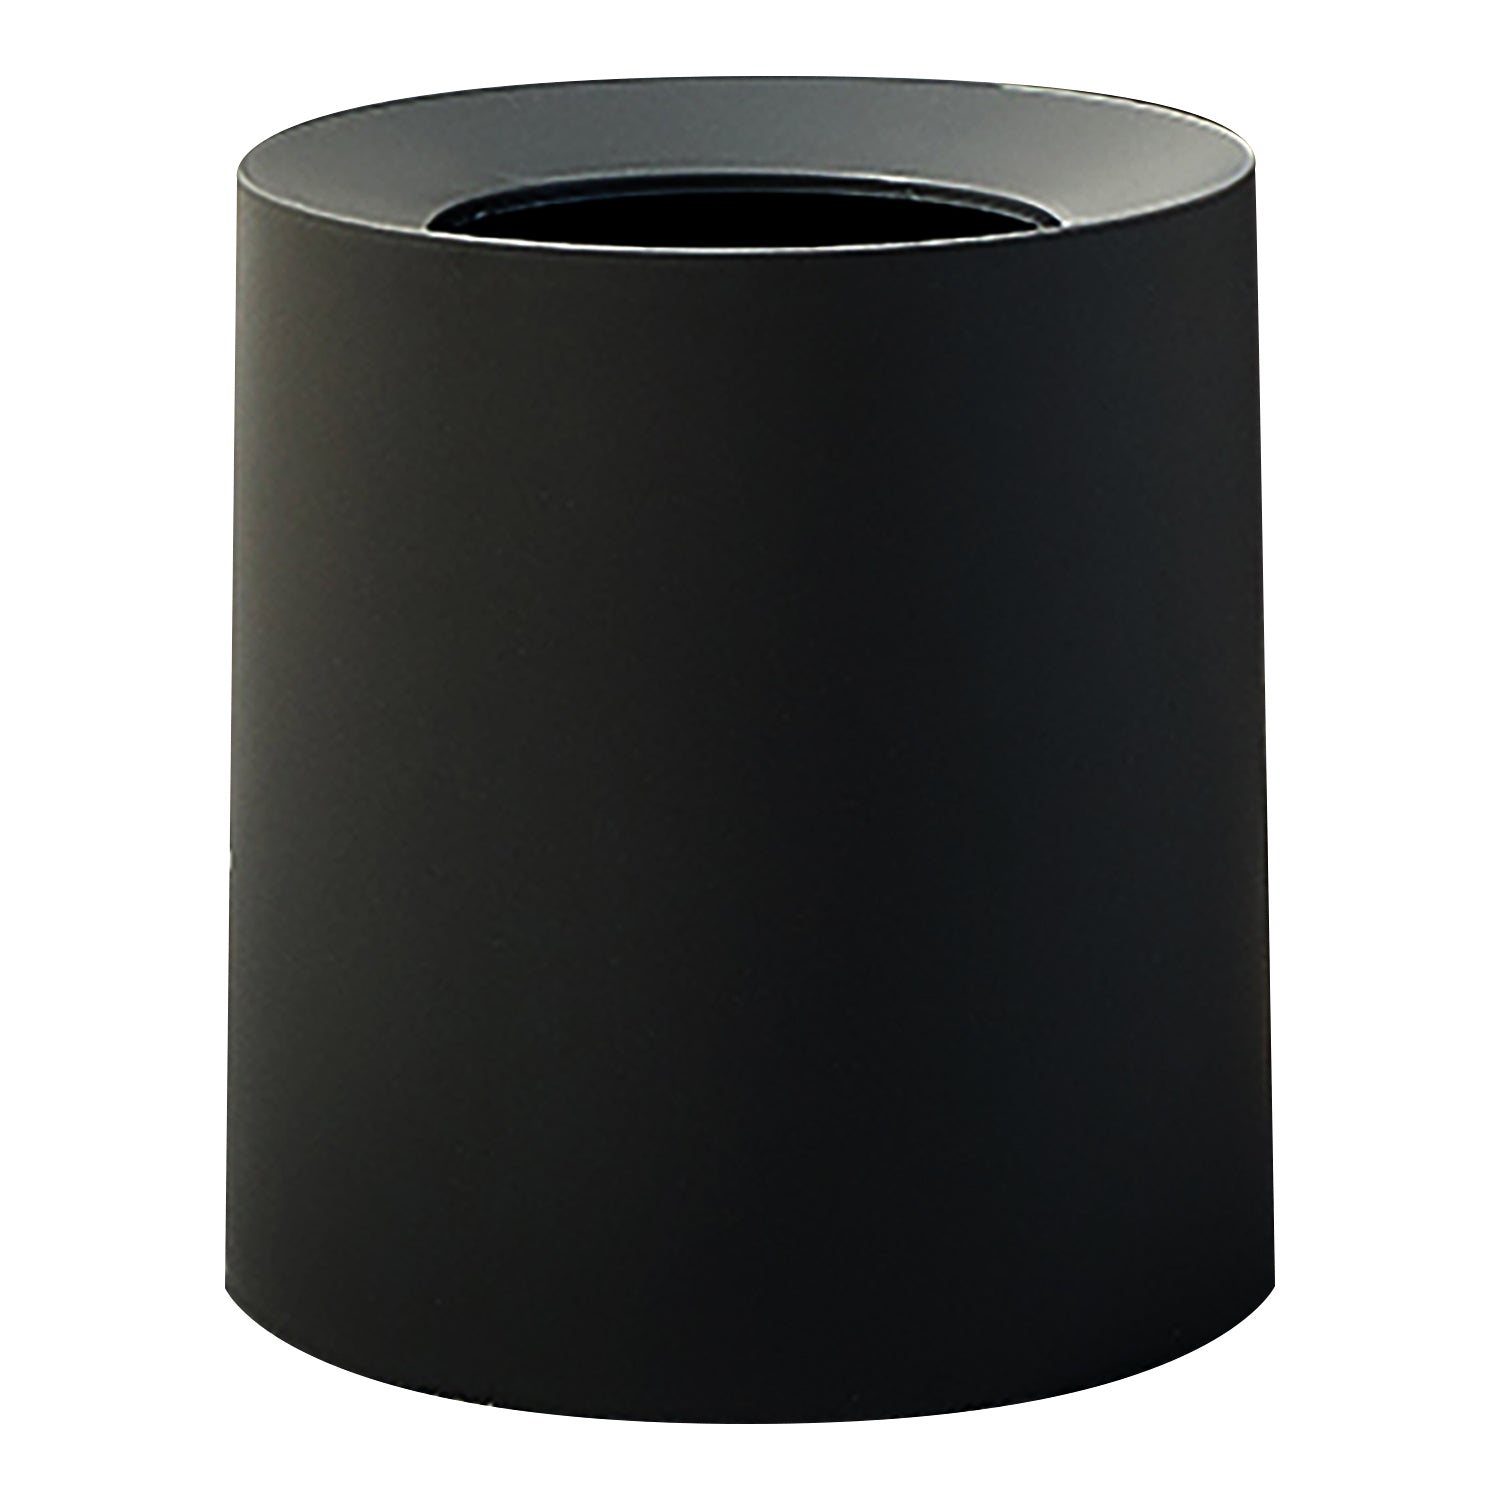 Load image into Gallery viewer, 2.1/3.2 Gallon Modern Round Waste Basket | Garbage Can with Removable Plastic Bin Liner